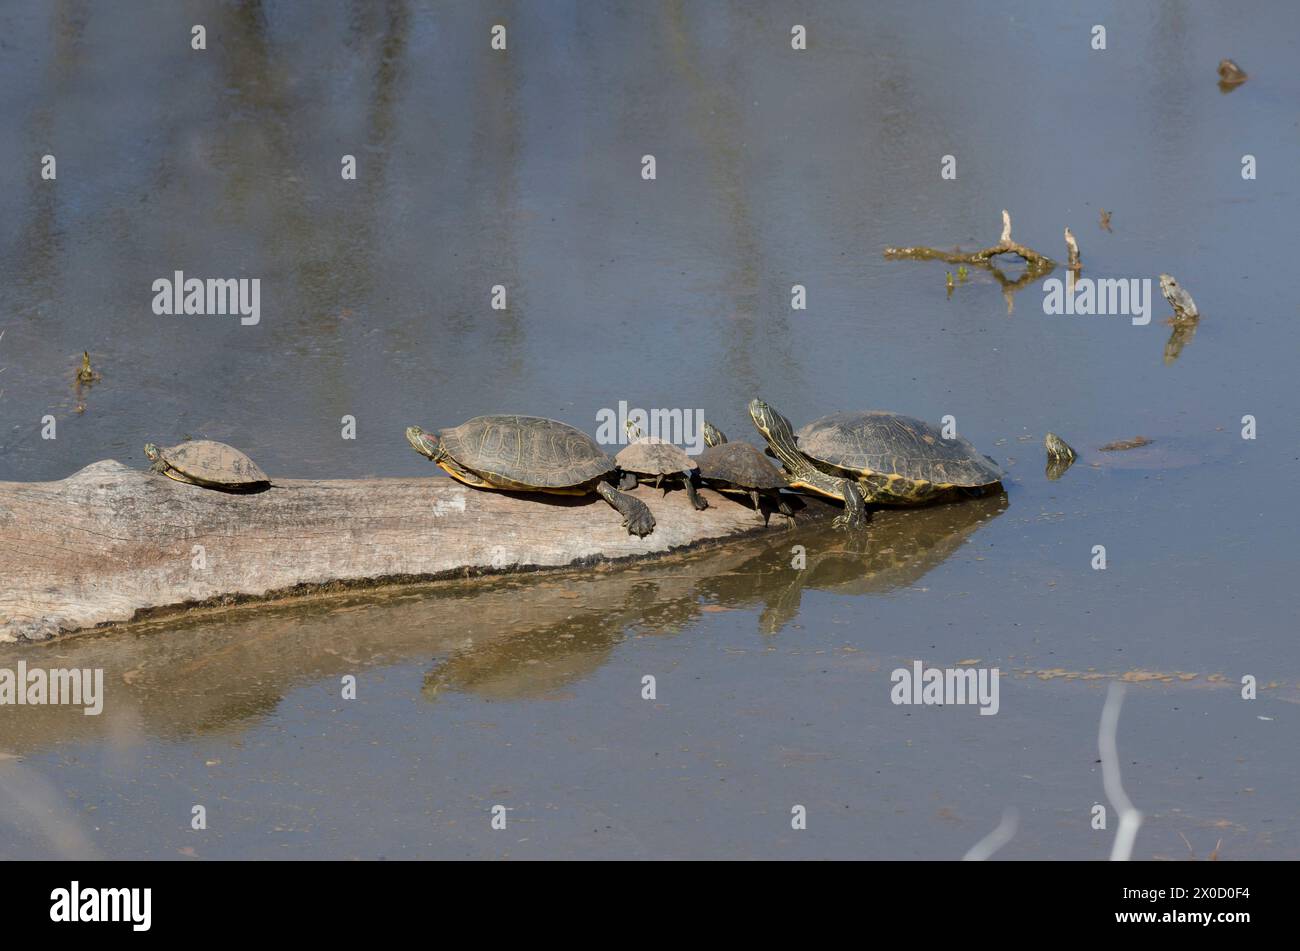 Red-eared slider, Trachemys scripta elegans, and Eastern River Cooters, Pseudemys concinna concinna, basking on log Stock Photo